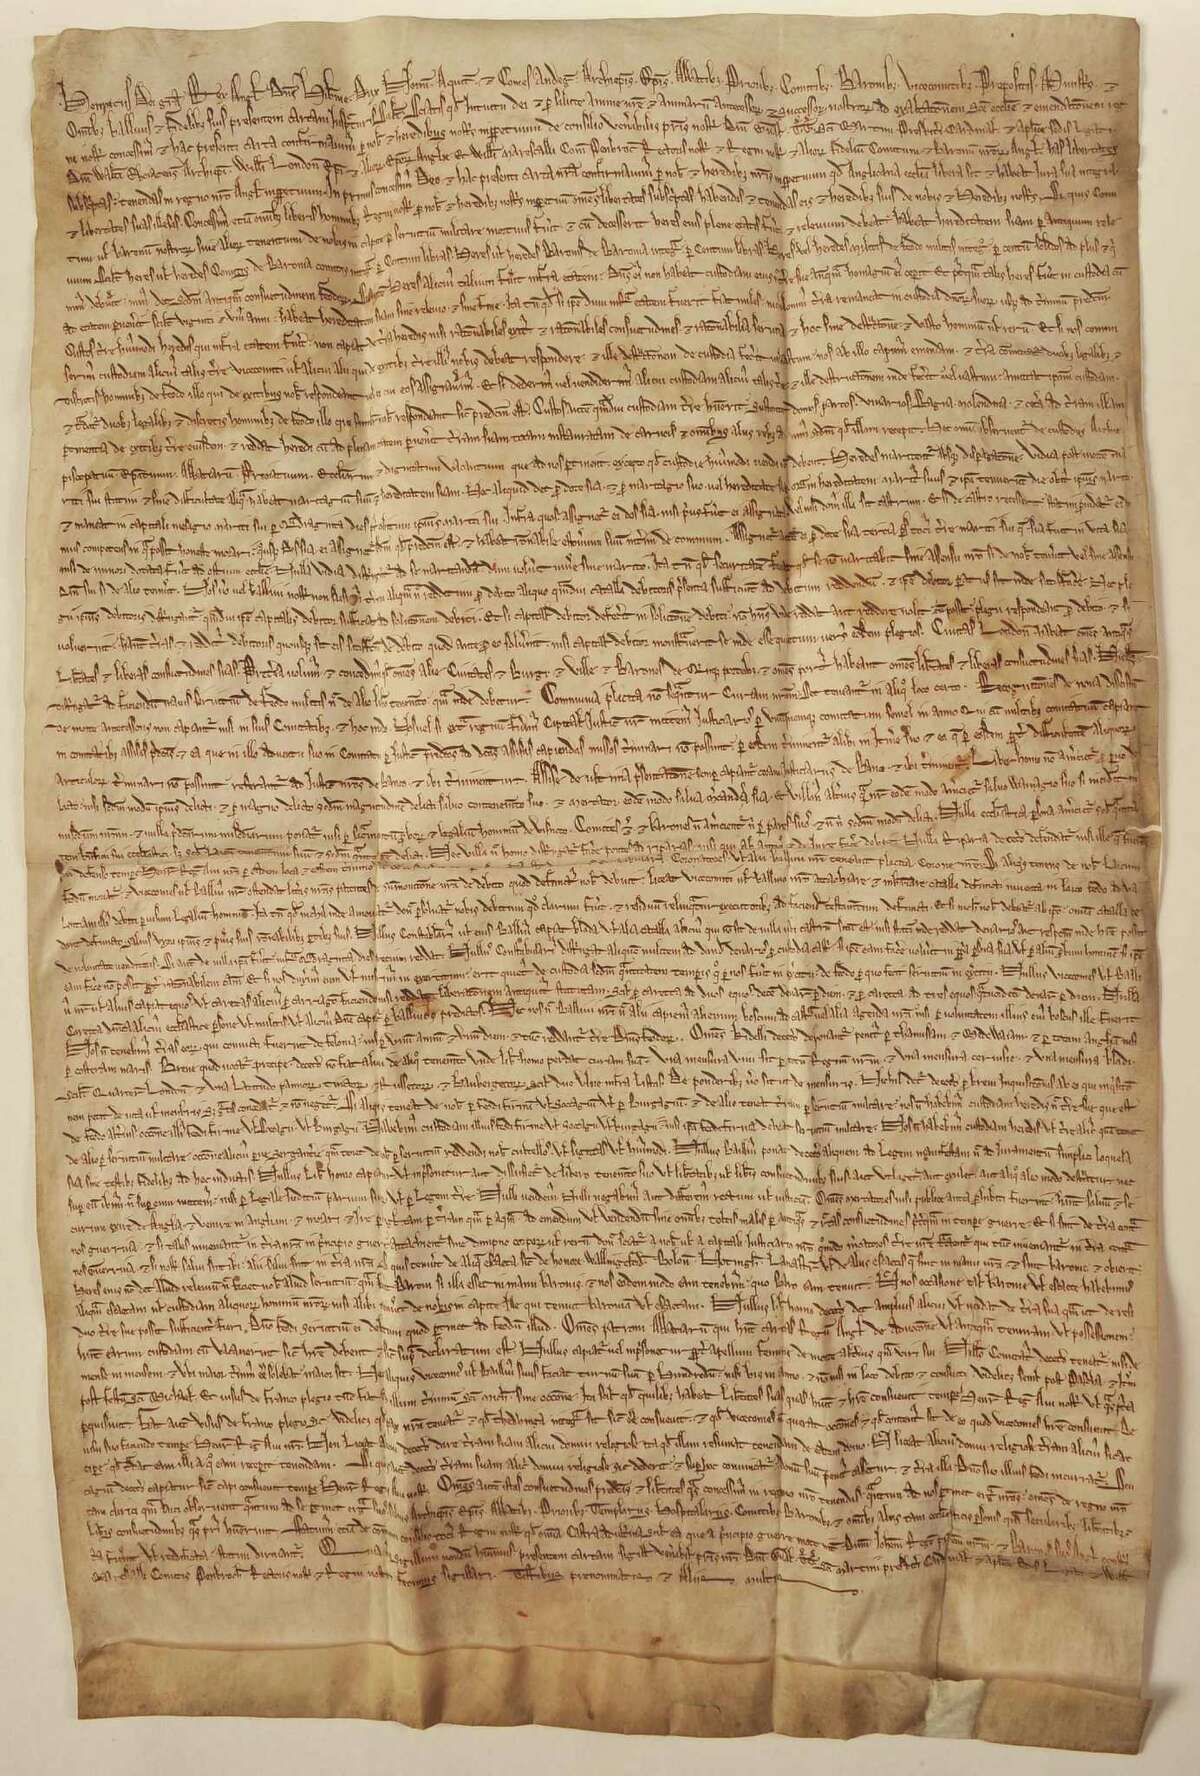 A 1217 copy of the Magna Carta, which King John of England issued in 1215 to avert a civil war, will be displayed at the Houston Museum of Natural Science for six months starting in February.